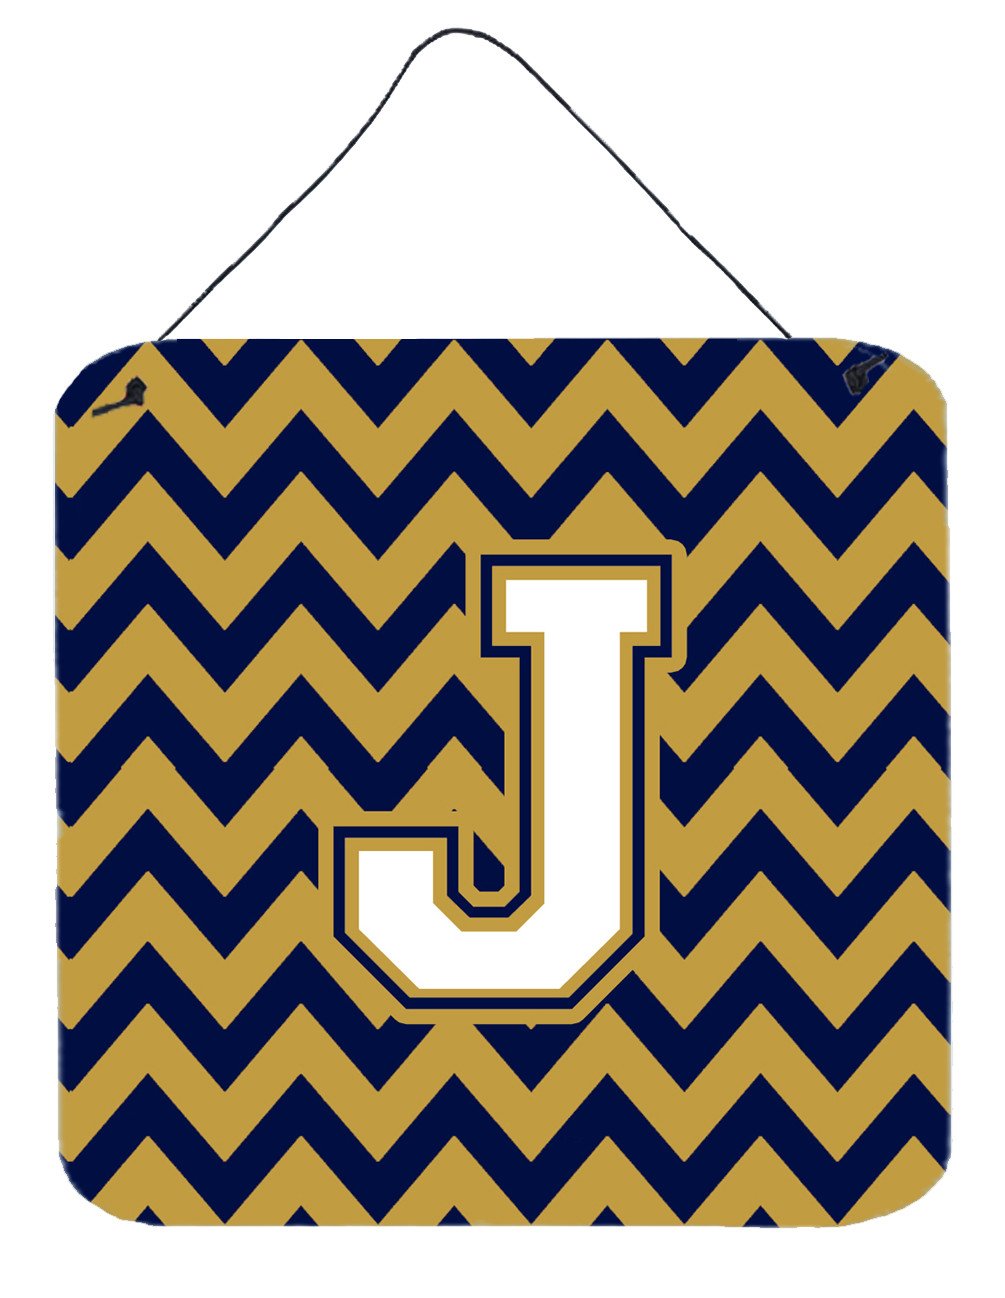 Letter J Chevron Navy Blue and Gold Wall or Door Hanging Prints CJ1057-JDS66 by Caroline's Treasures